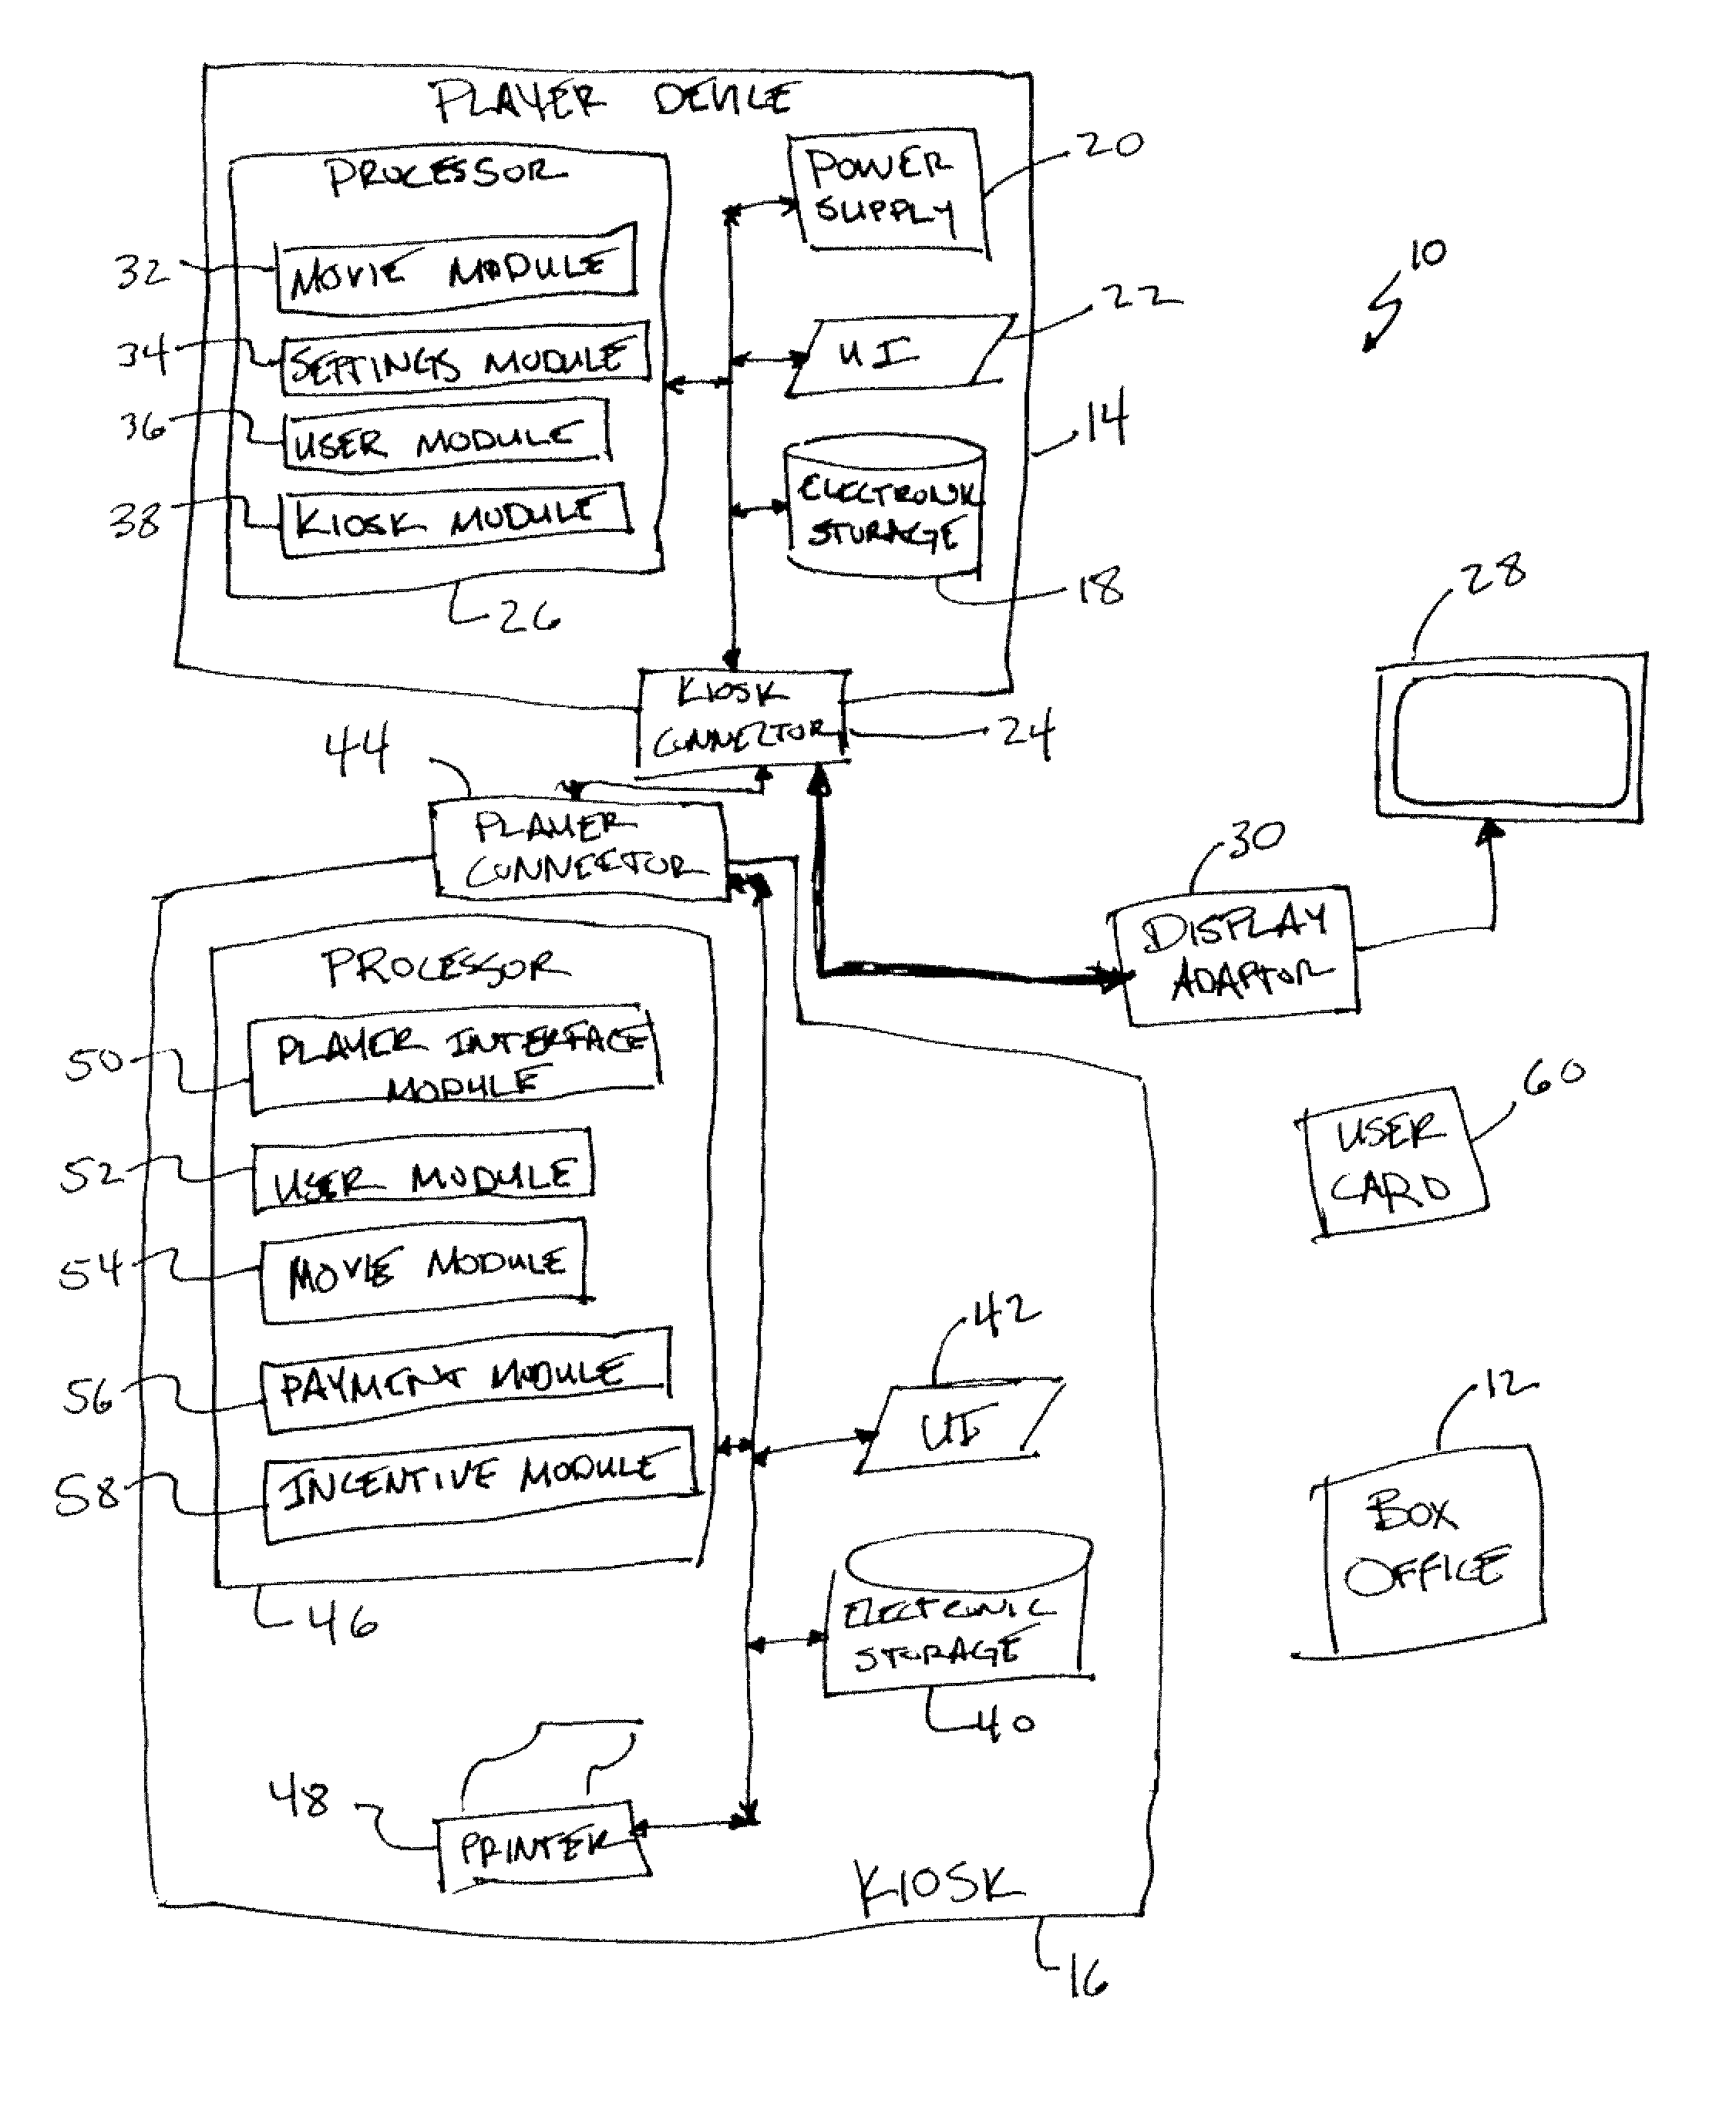 System and method for facilitating the home viewing of first-run movies